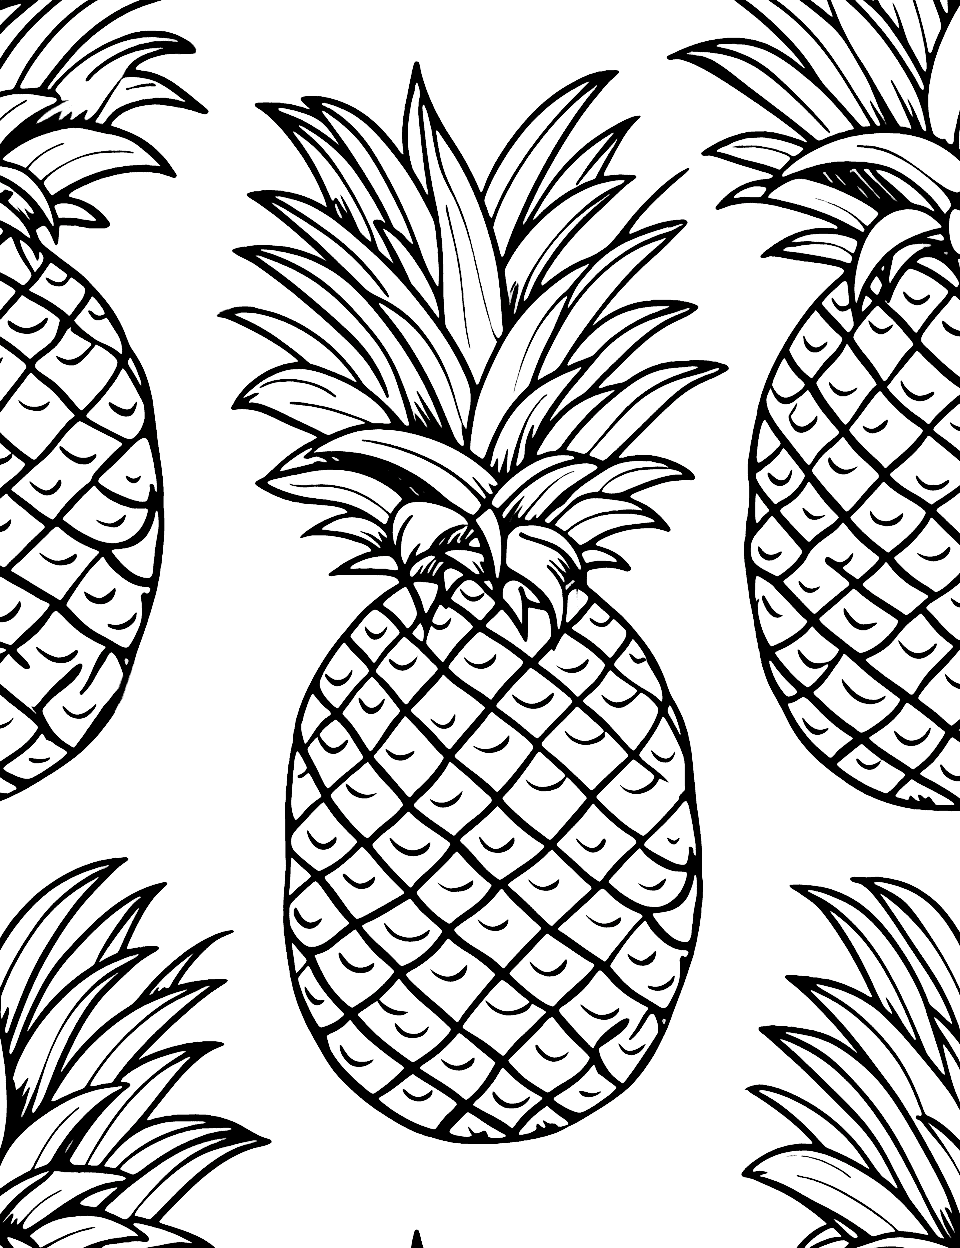 Pineapple Party Summer Coloring Page - An array of pineapples in various sizes, with each having unique patterns for coloring.